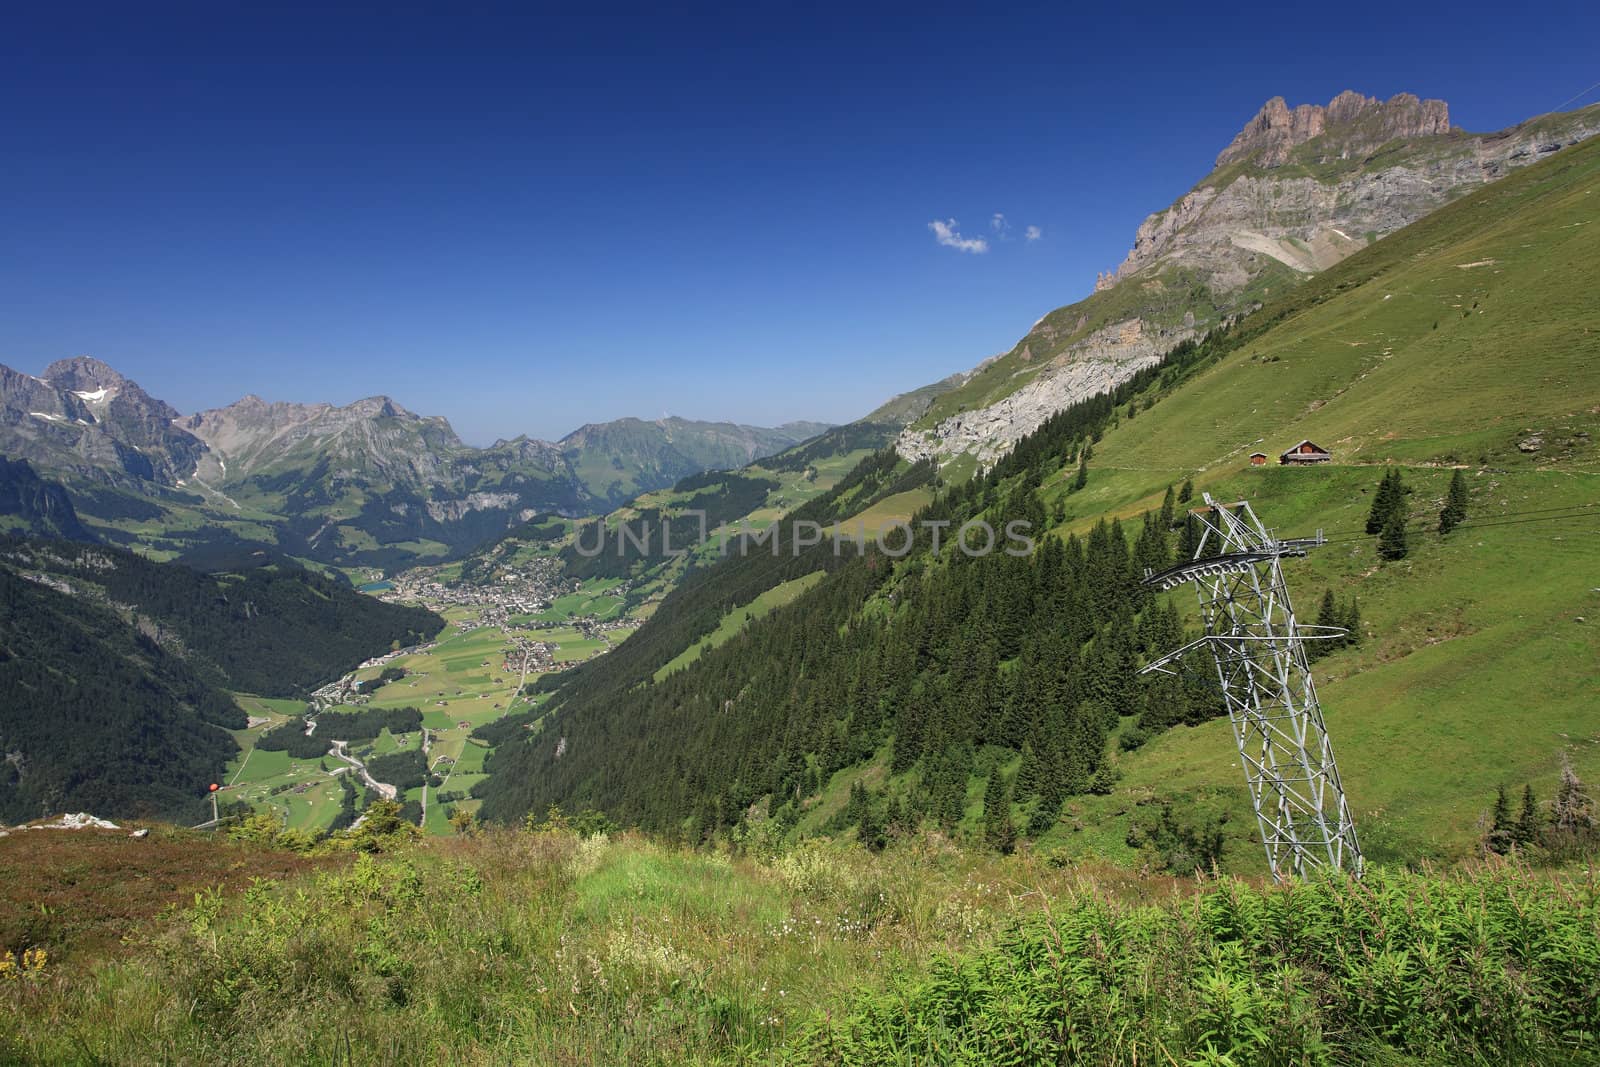 Photo of the Swiss Alps, looking down at the city of Engelberg from Fuerenalp in the canton of Obwalden.